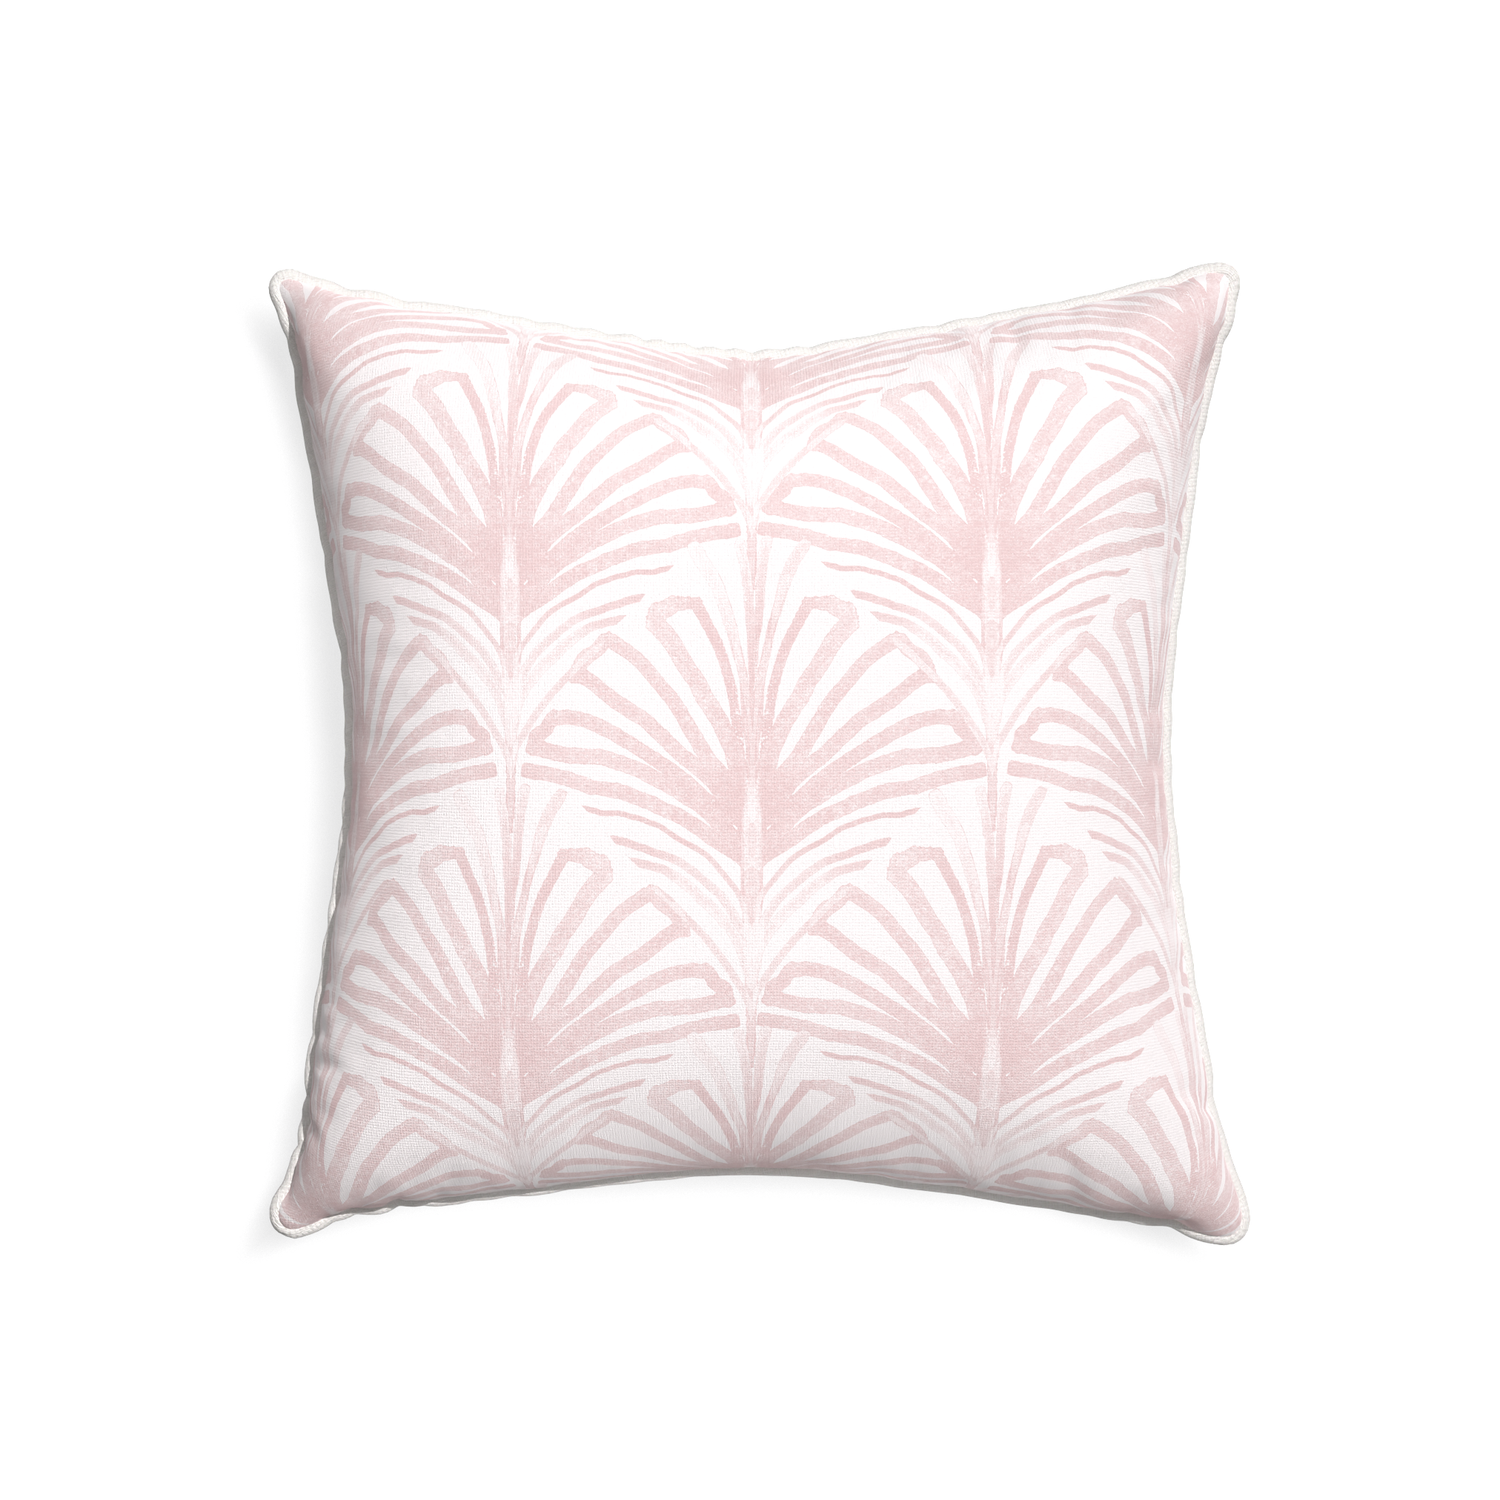 22-square suzy rose custom pillow with snow piping on white background